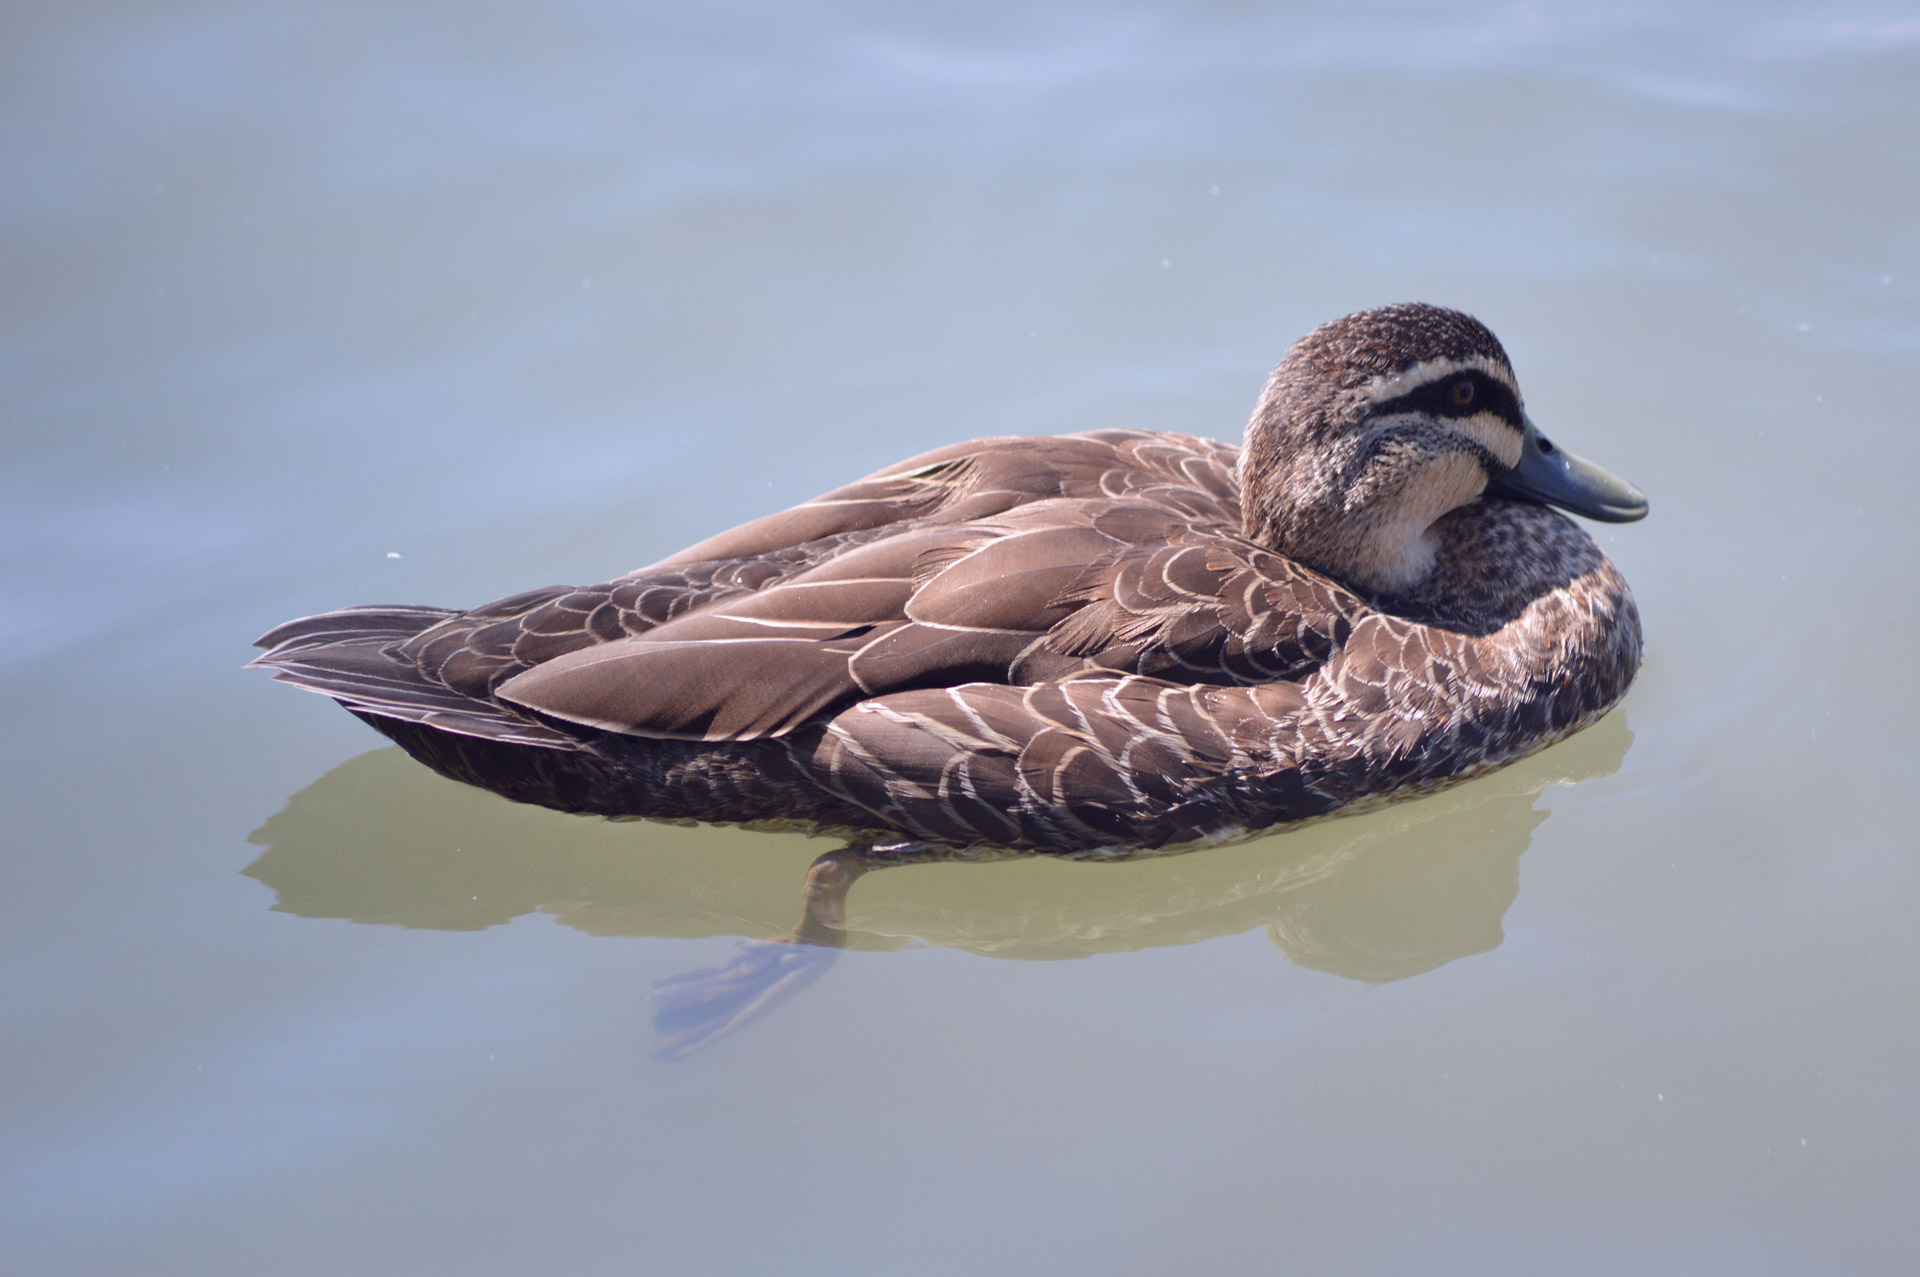 Duck posing for food in calm water Australia